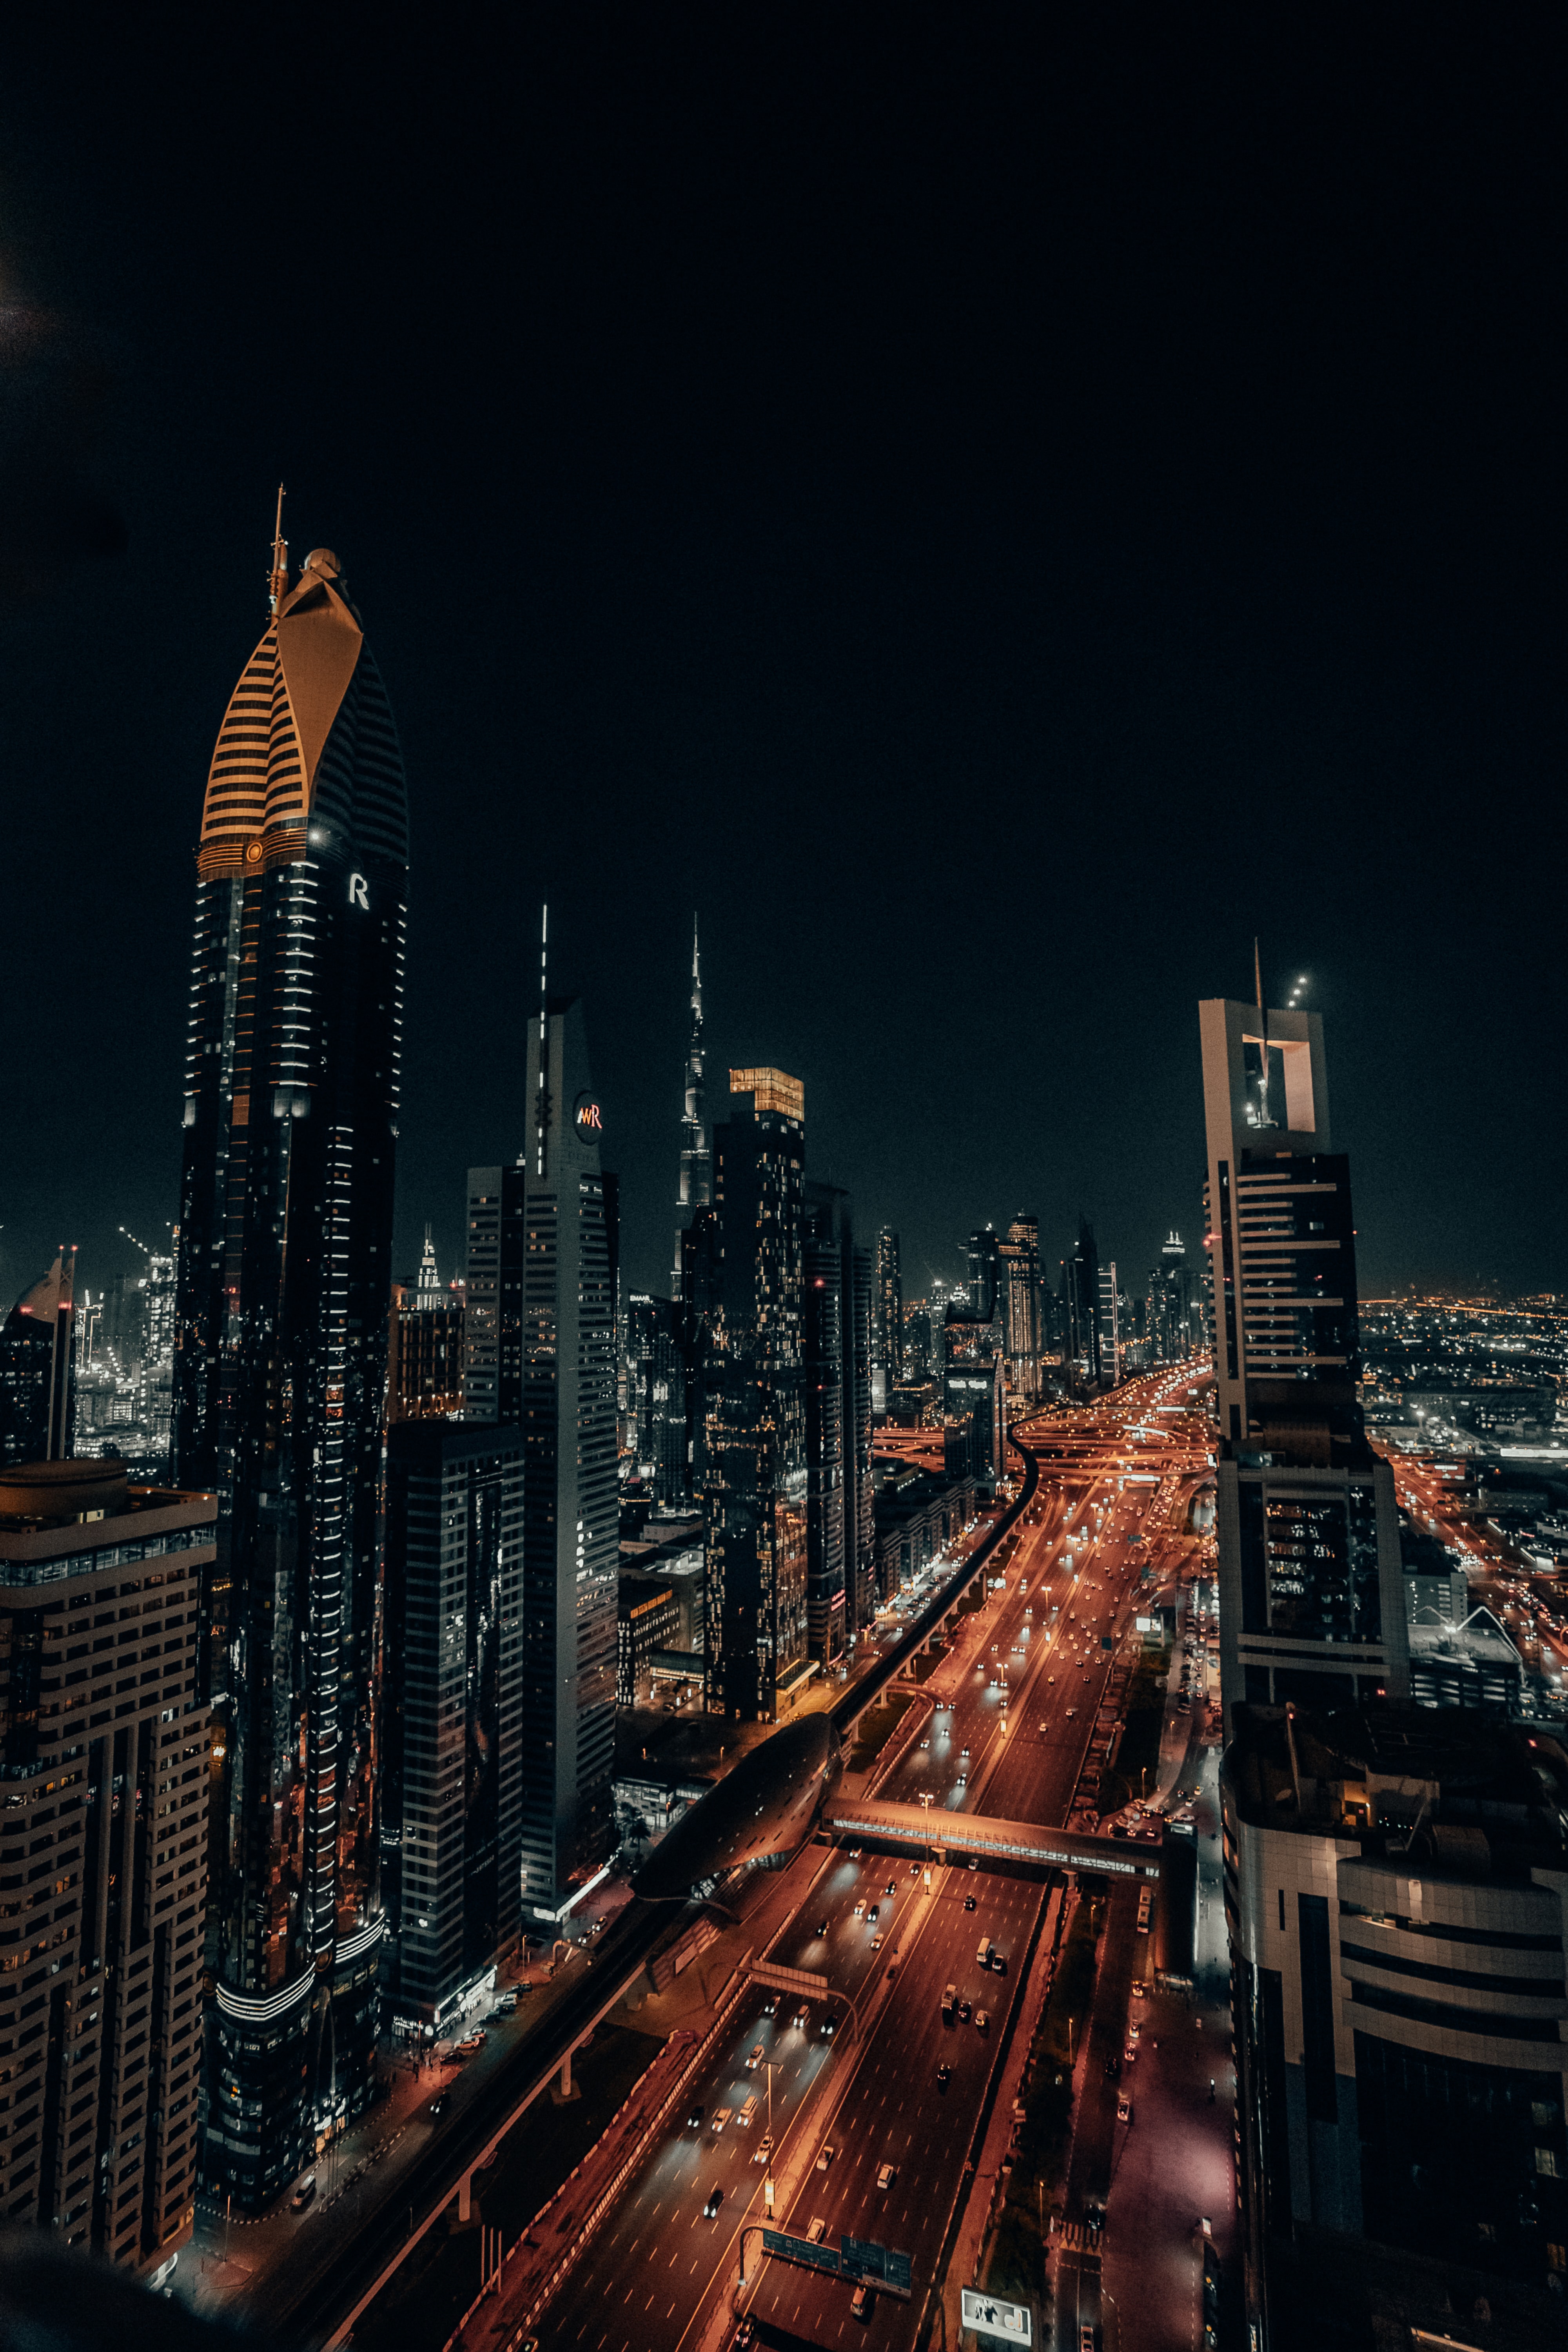 Architecture night city, road, lights, cities HD desktop images